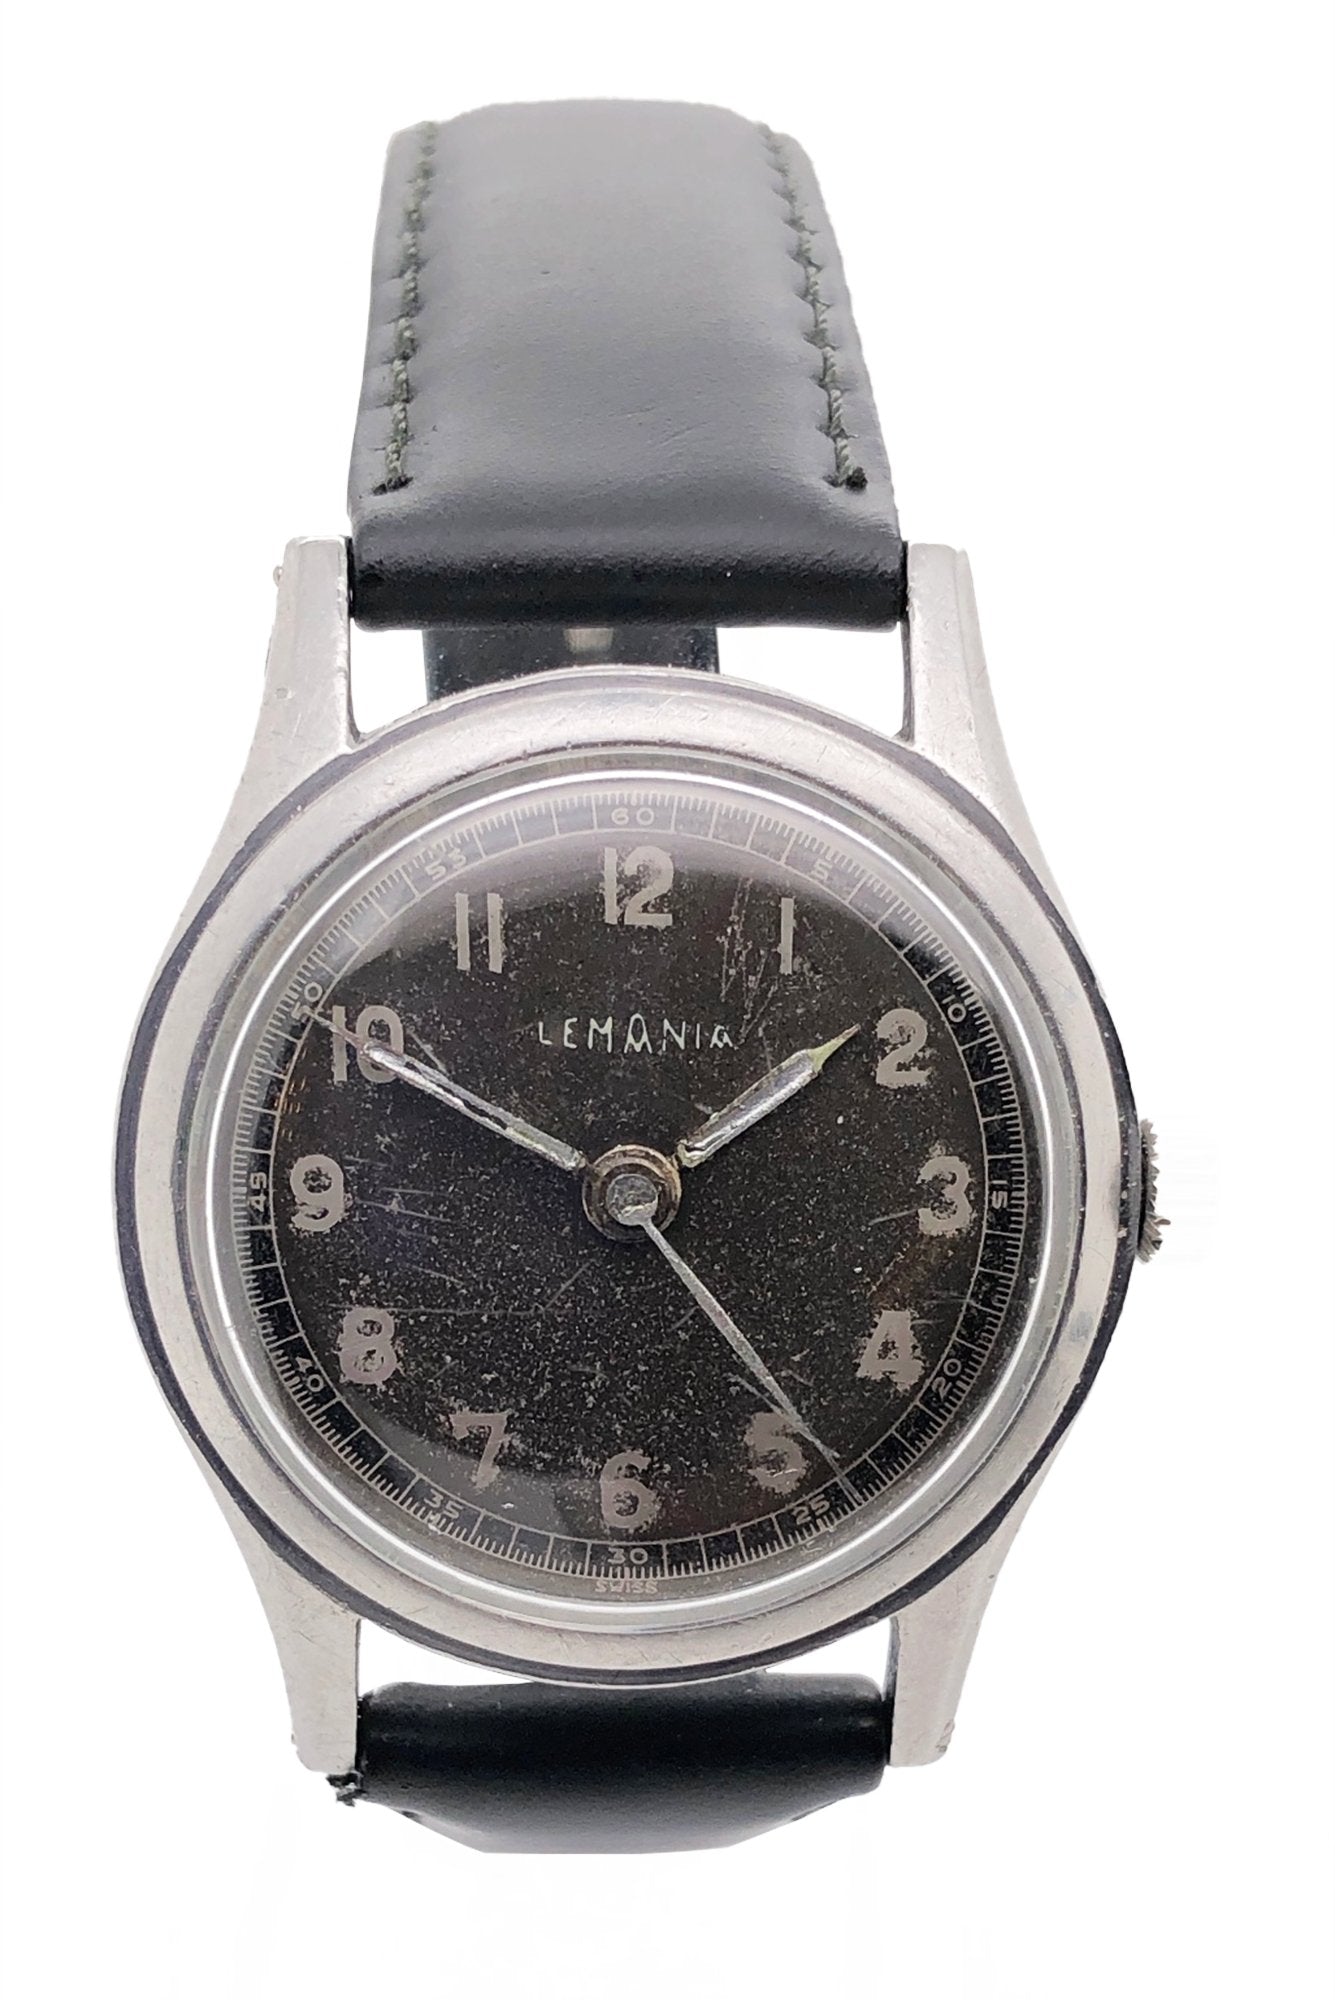 Lemania Military Black - Counting Time Watch Purveyors